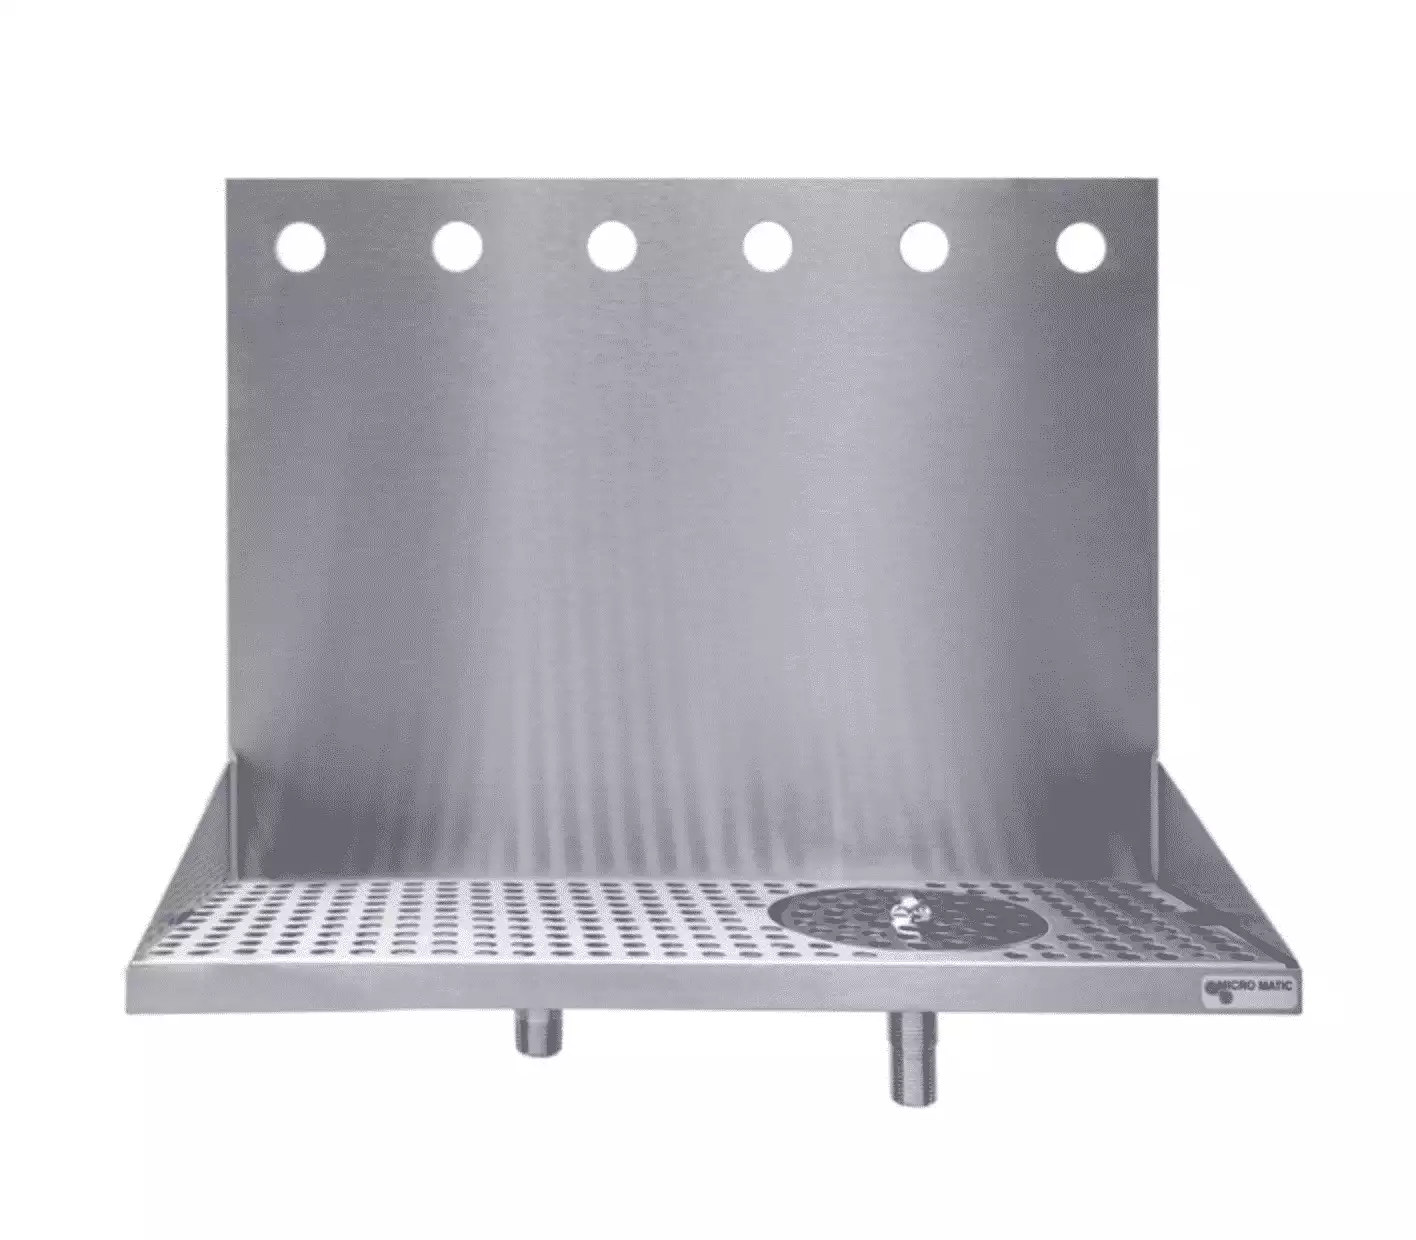 https://www.brewcabin.com/wp-content/uploads/6-Faucet-Stainless-Steel-Wall-Mount-Drip-Tray-with-Glass-Rinser.webp